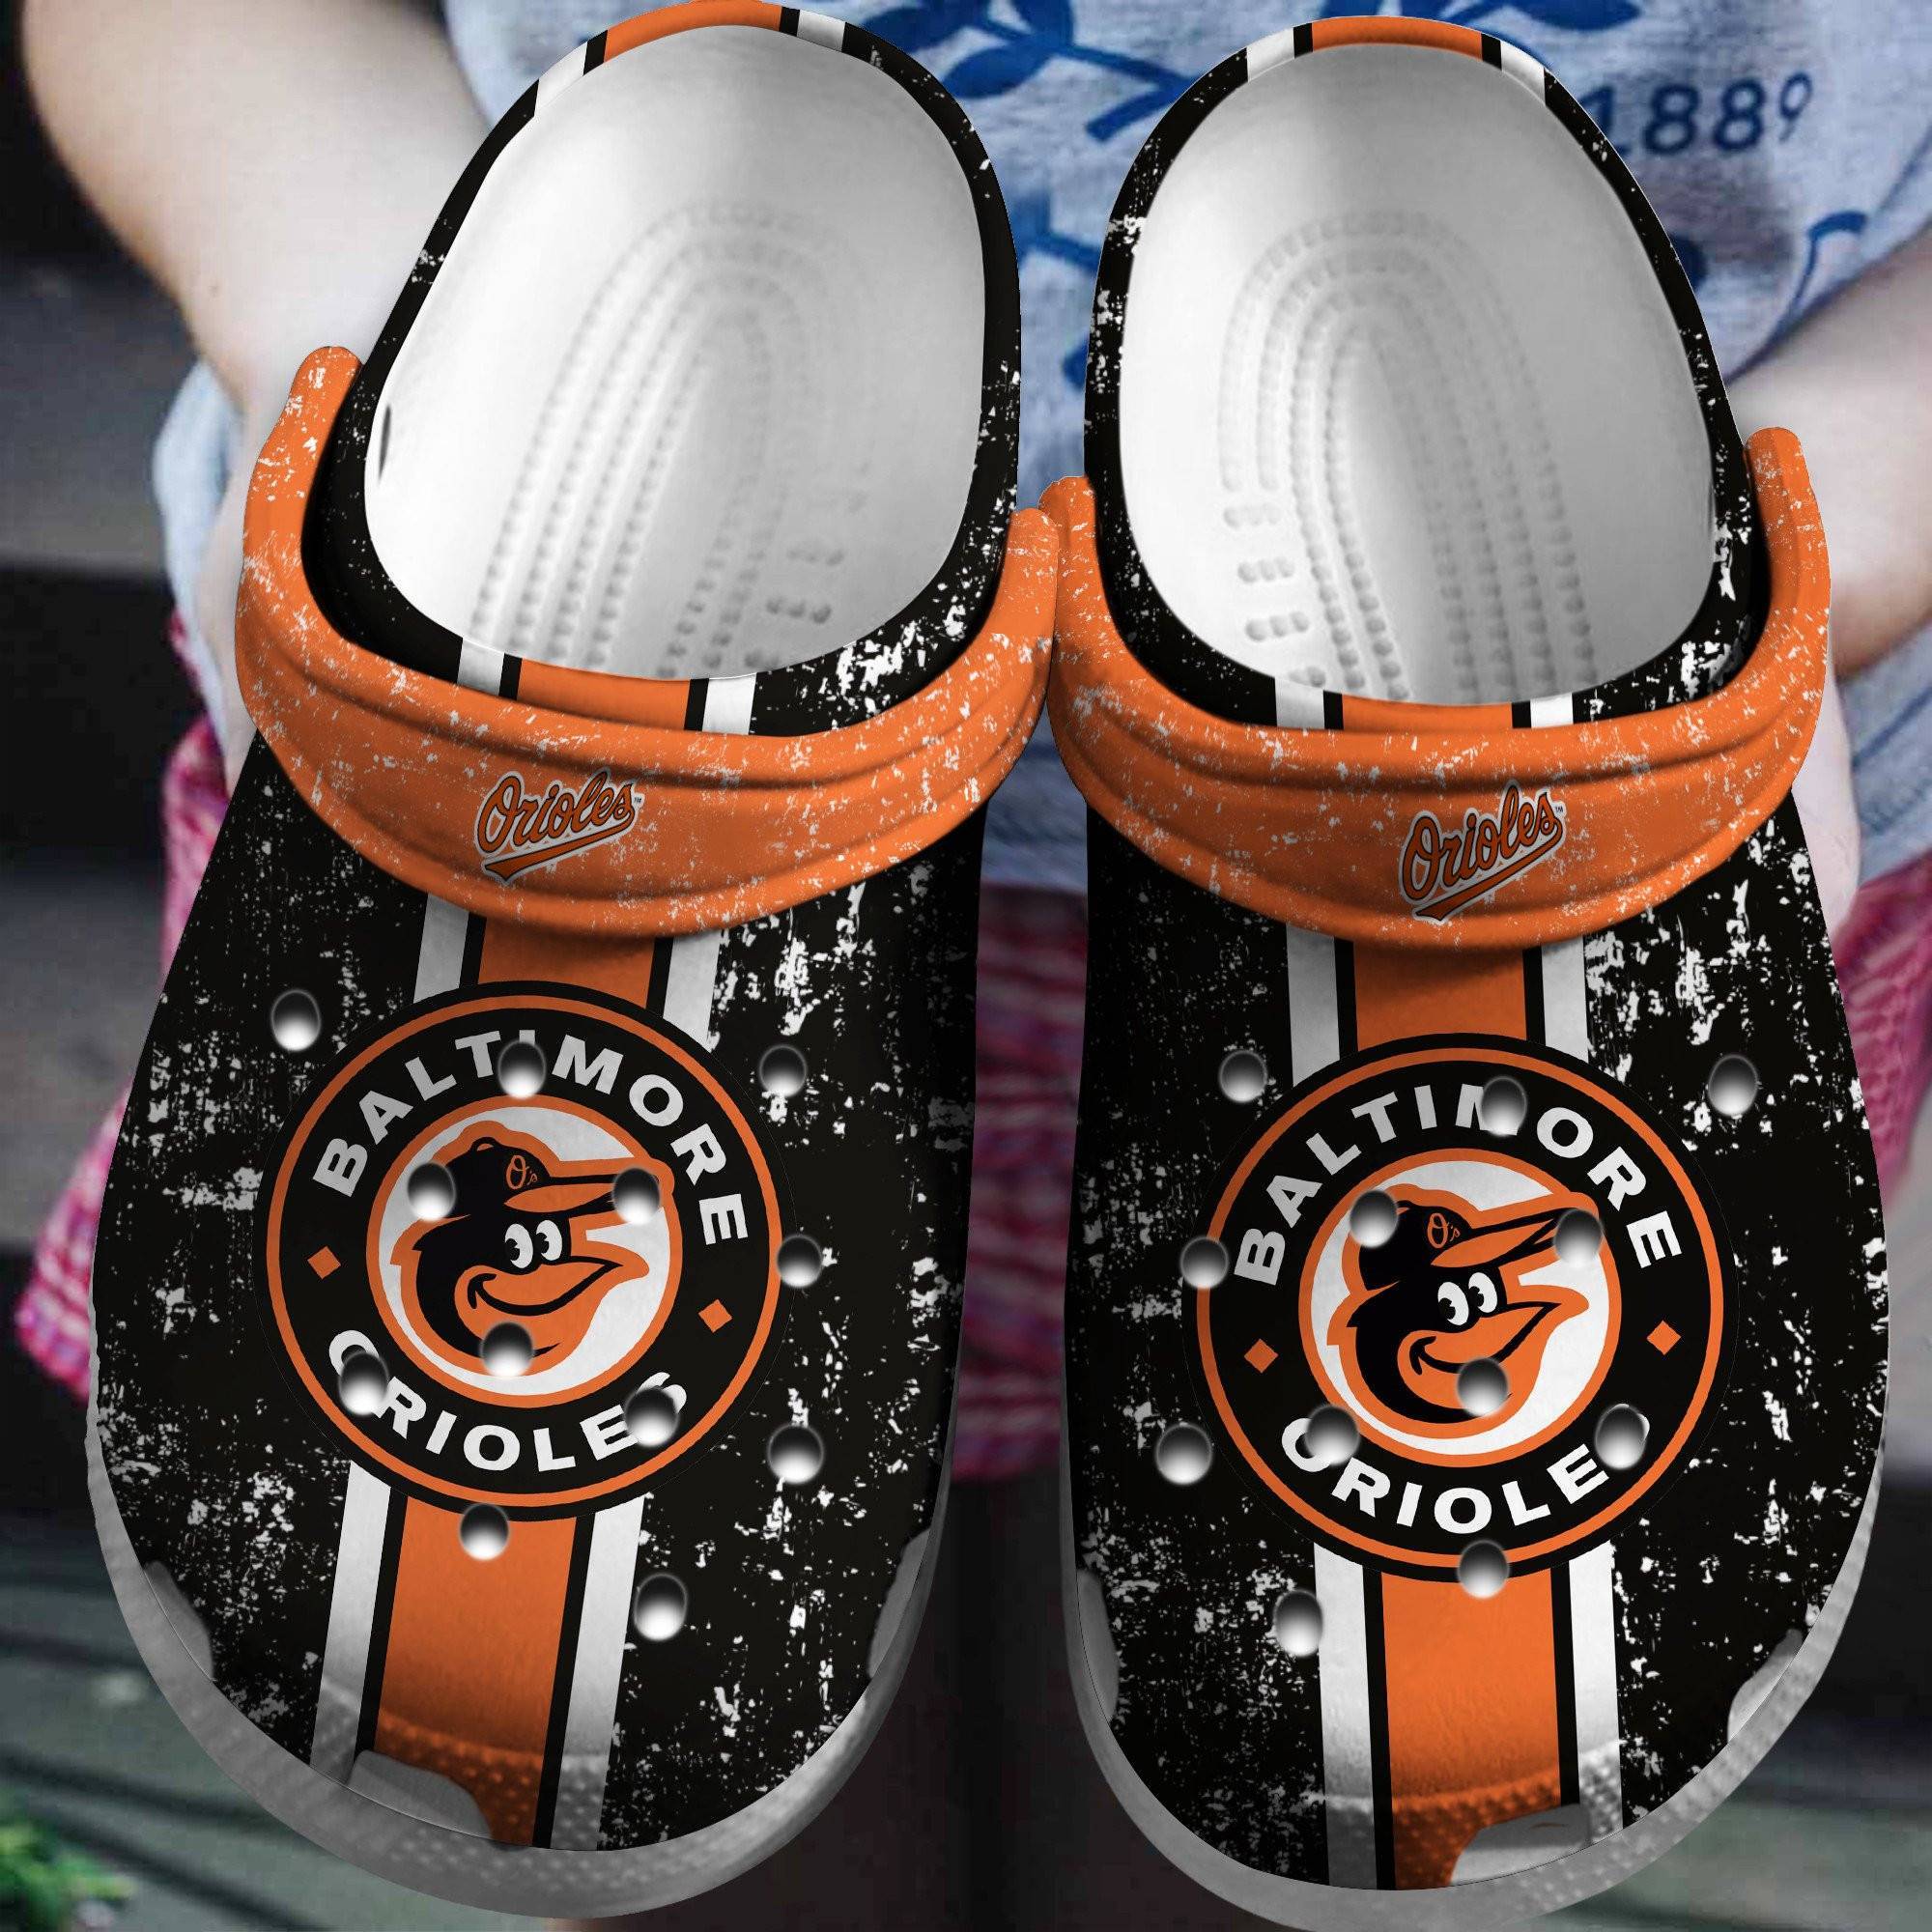 Hot Mlb Team Baltimore Orioles Crocss Clog Shoesshoes Trusted Shopping Online In The World